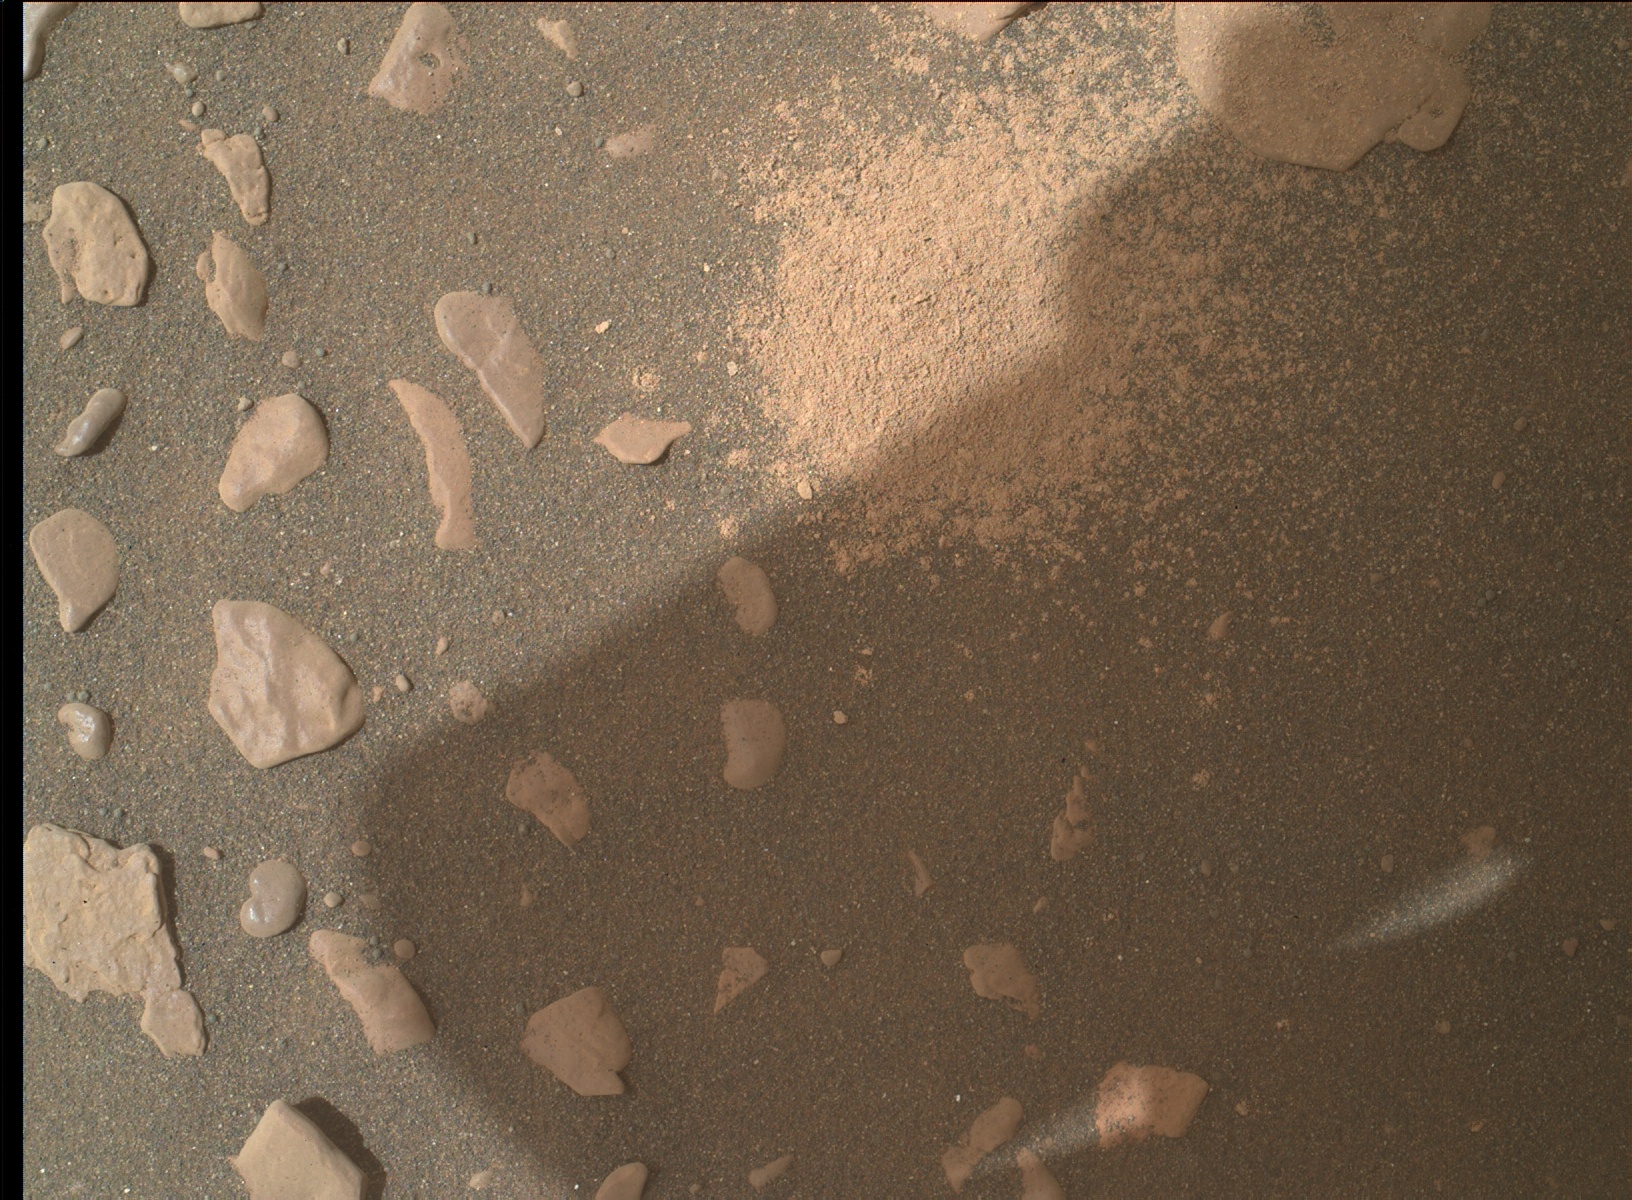 Nasa's Mars rover Curiosity acquired this image using its Mars Hand Lens Imager (MAHLI) on Sol 2378